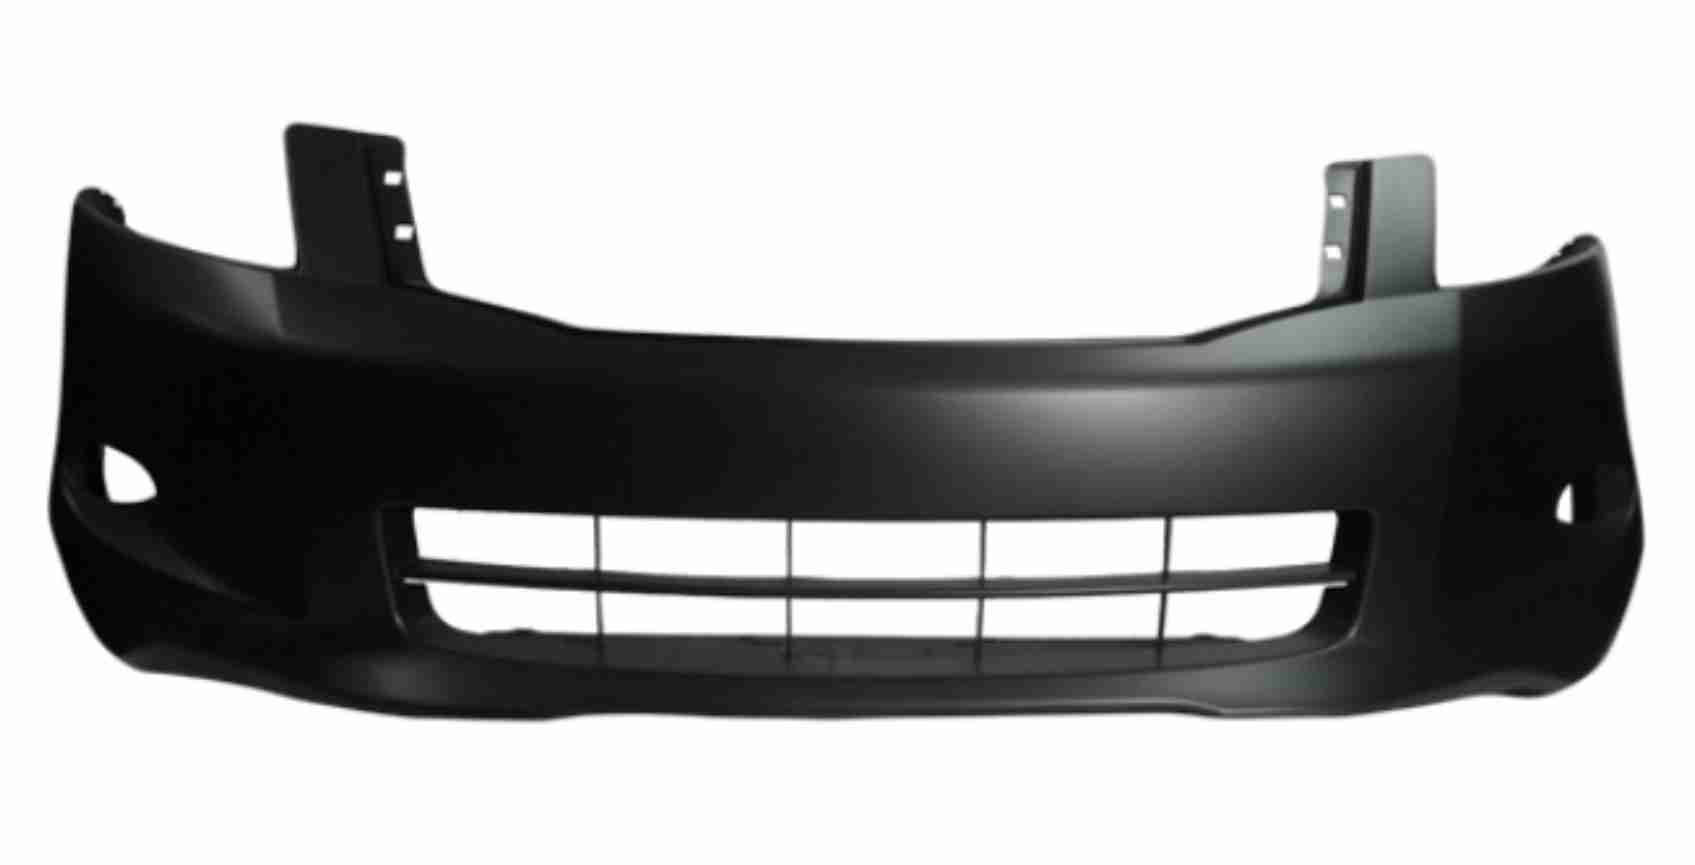 BUM501754(FR) - 2005295 - ACCORD 08 CT1 FRONT BUMBER